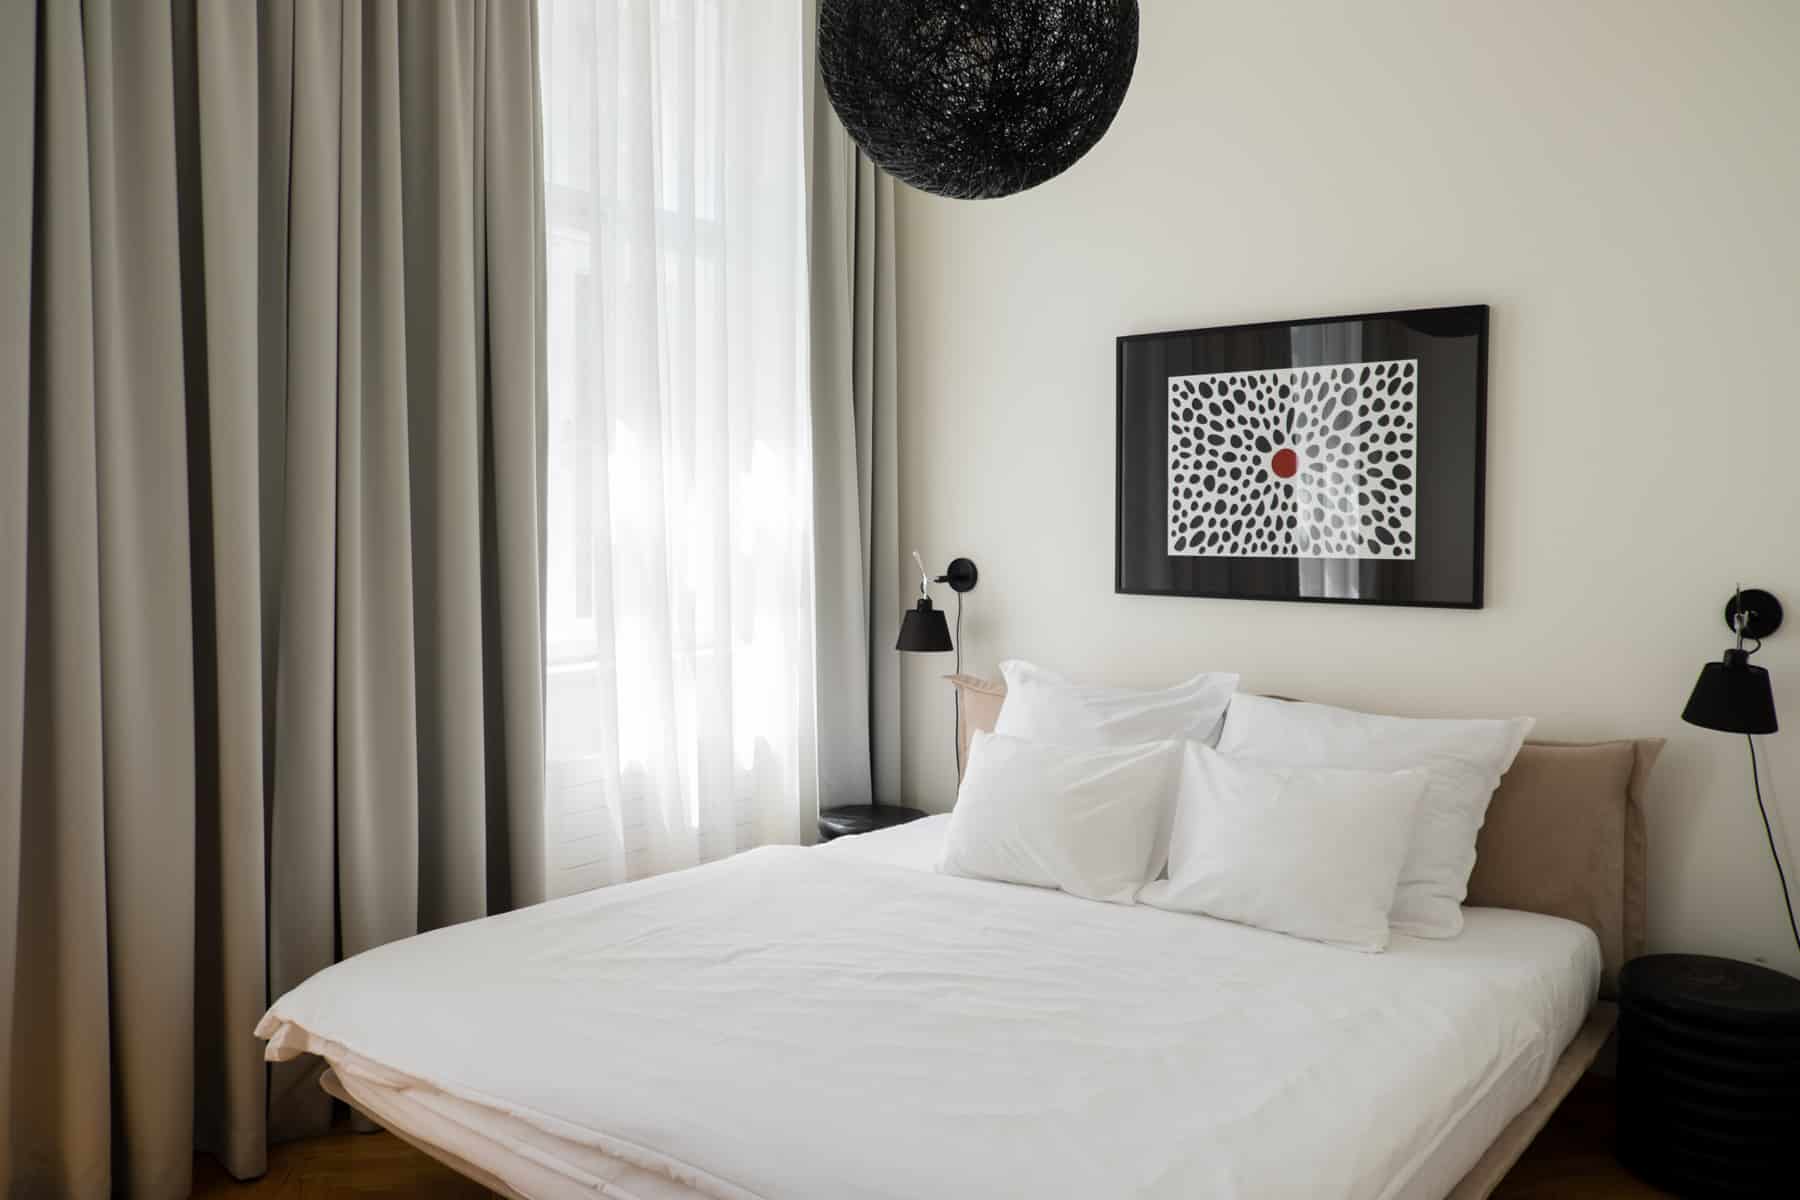 A modern decorated bedroom with black and white furnishings. 